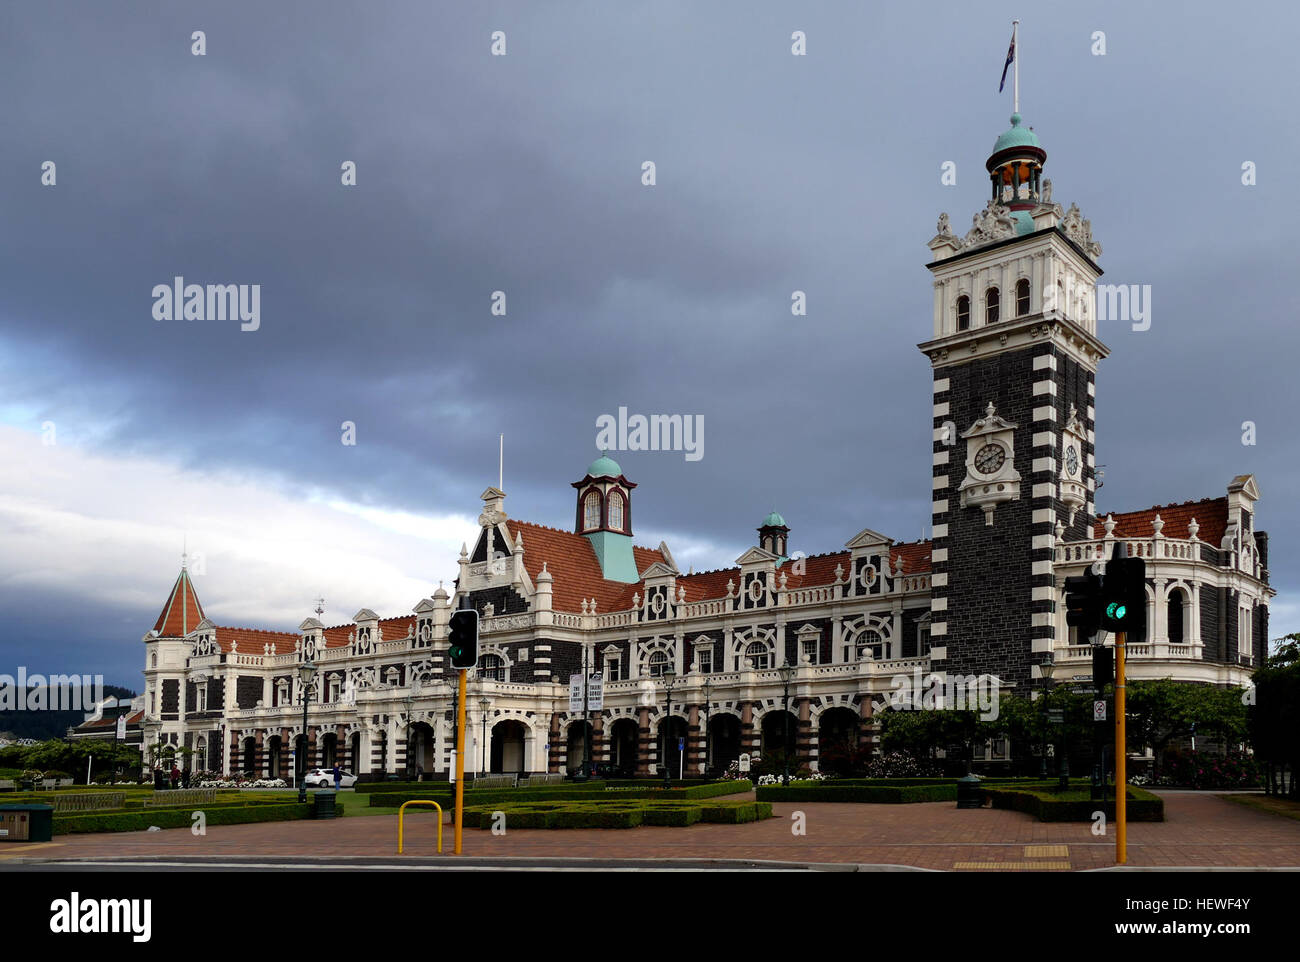 Marvel at the size, architecture and rich embellishments of Dunedin Railway Station - it's the grandest 'Gingerbread House' you'll ever see.  In the early 1900s Dunedin was the commercial centre of New Zealand. A magnificent railway station befitting this status was opened here in 1906.  Today the station remains, fully restored to its former glory. The ornate Flemish Renaissance-style architecture features white Oamaru limestone facings on black basalt rock. The sheer size, grandiose style and rich embellishments of the station earned architect George Troup the nickname of Gingerbread George. Stock Photo